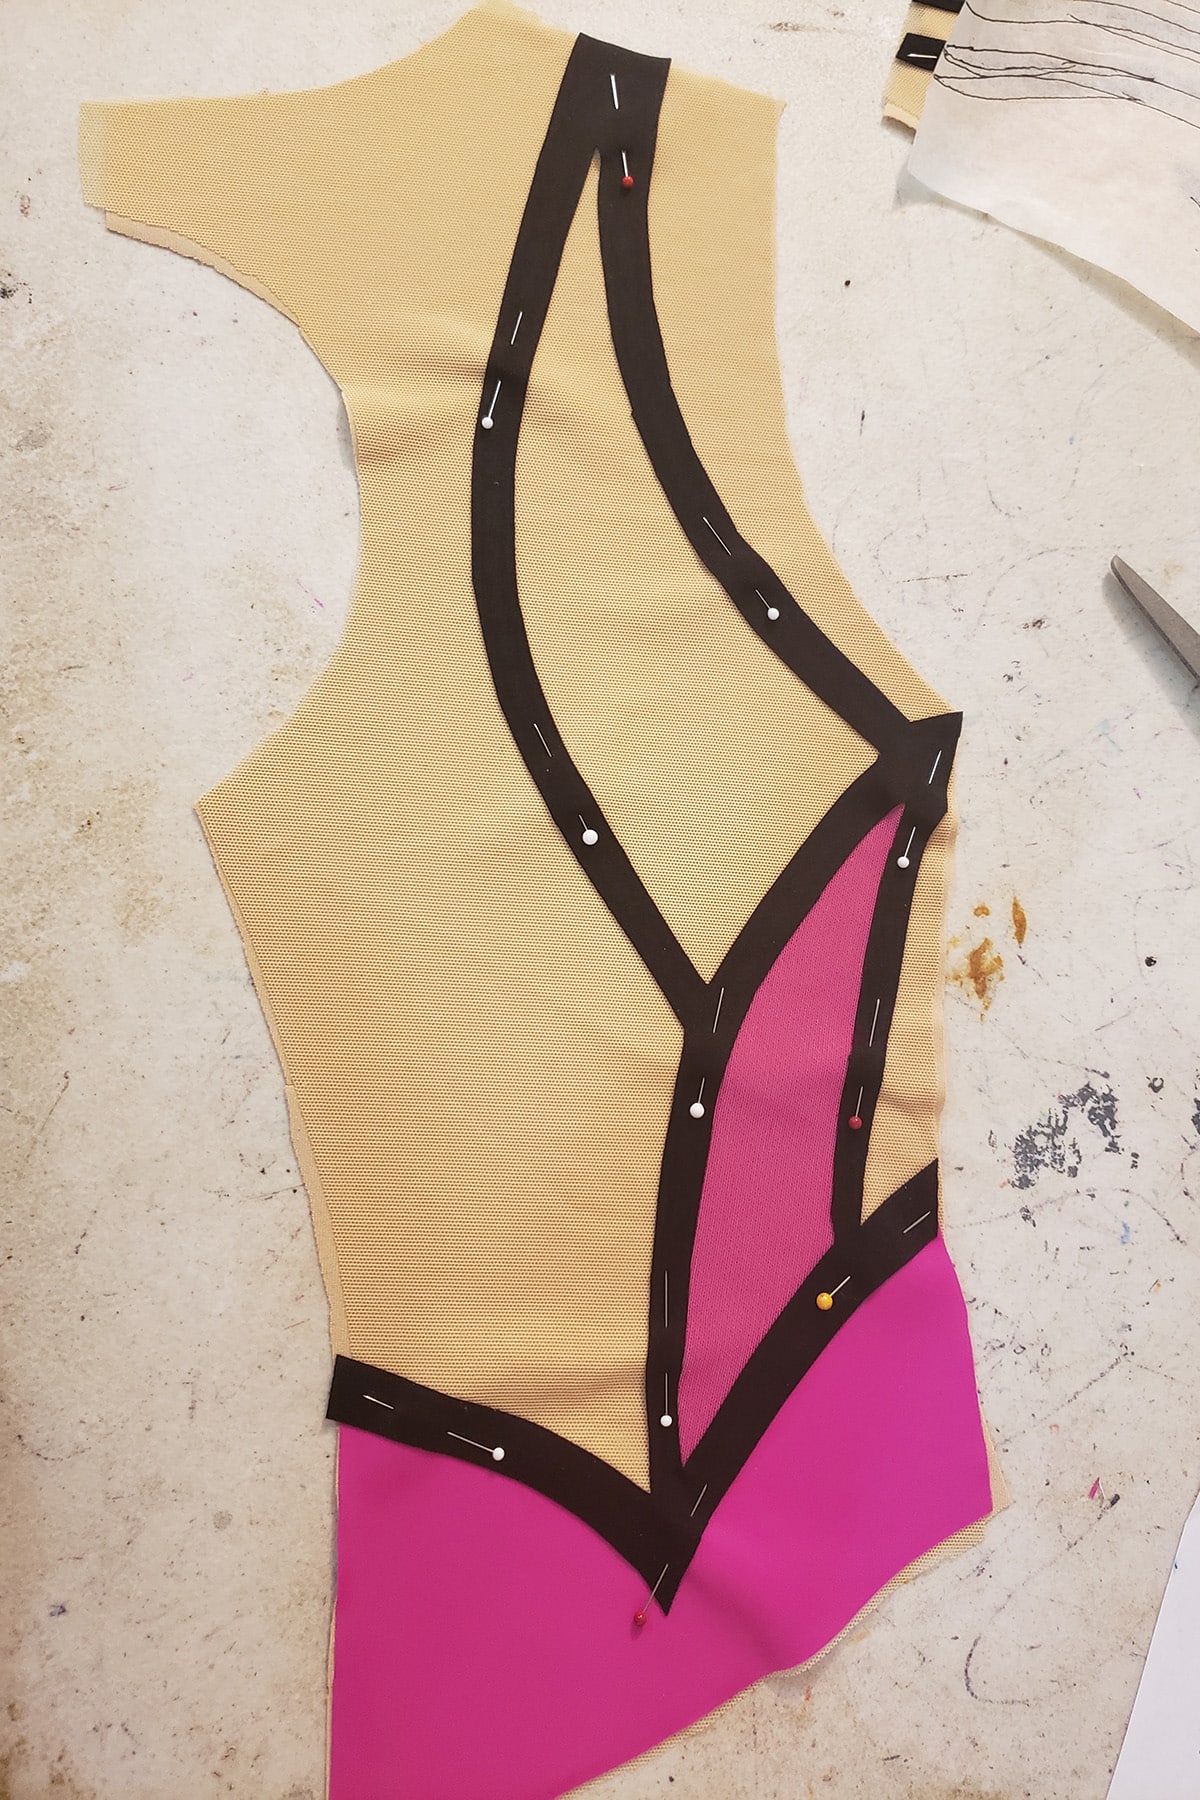 The right back half of the bodice, pinned together. It is a beige fabric piece, with pink and black pieces of fabric pinned to it.